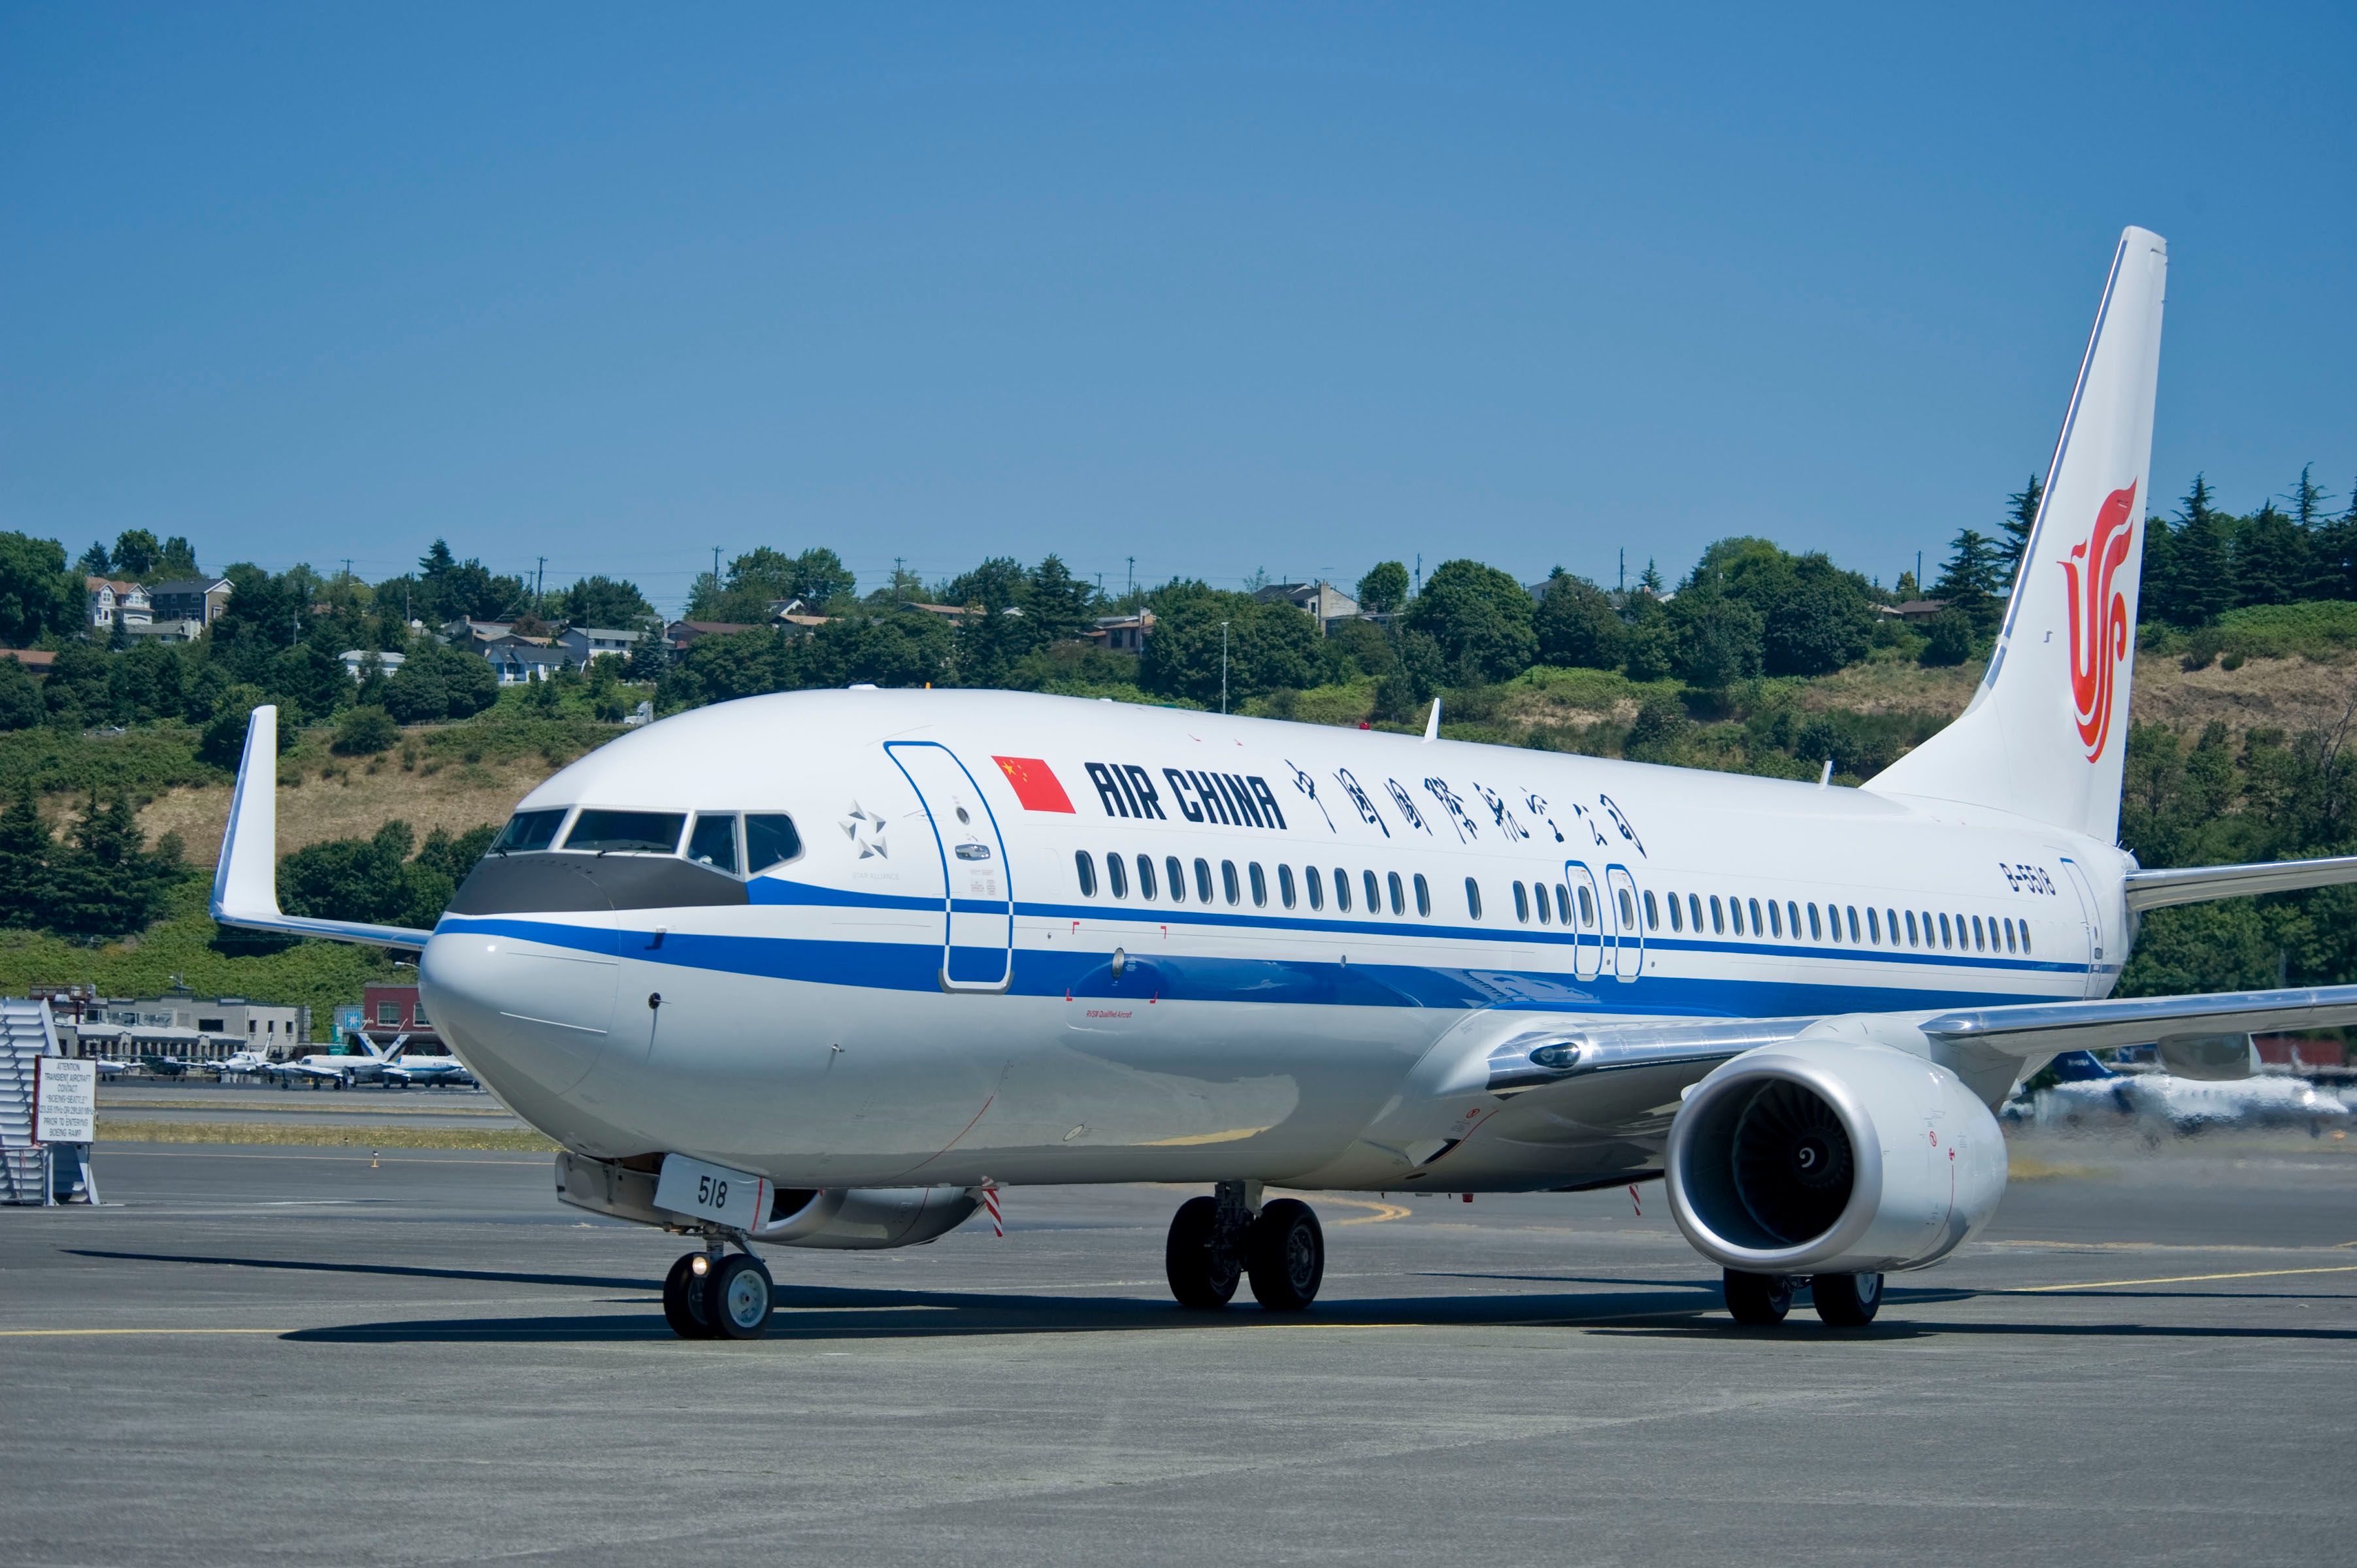 An Air China Boeing 737-800 Parked at an airport In Sunny Conditions.